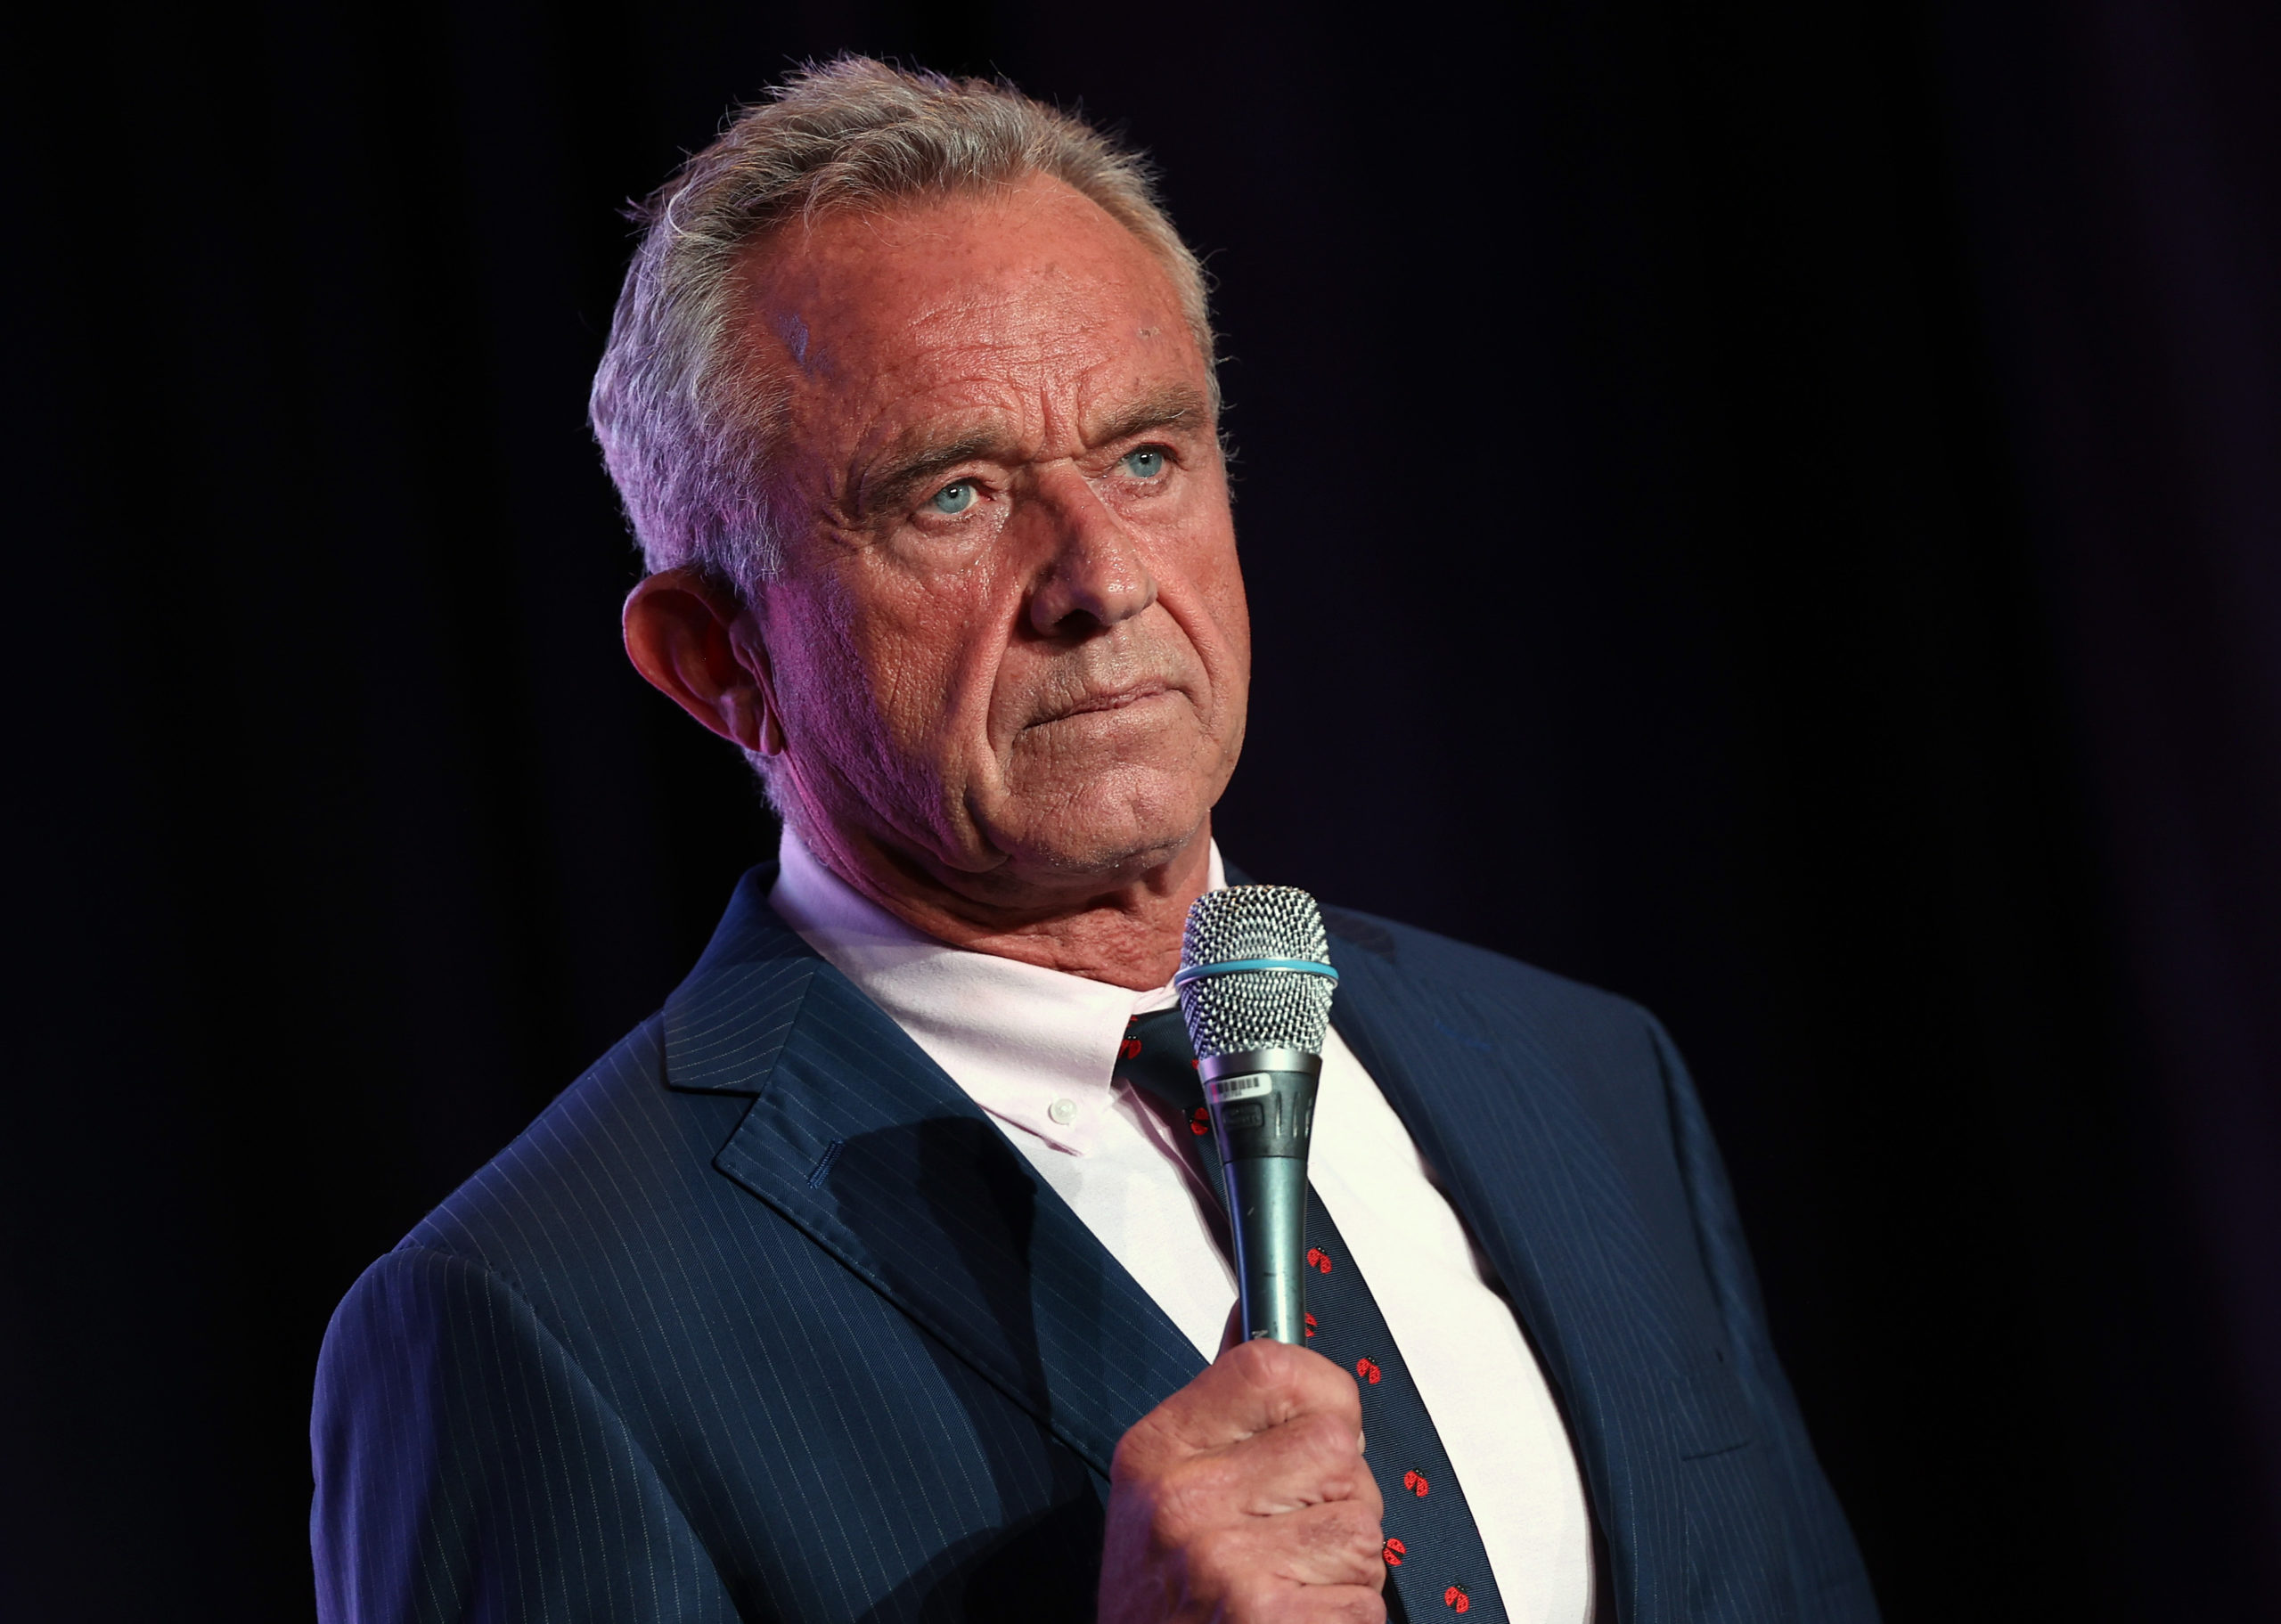 Independent presidential candidate Robert F. Kennedy Jr. speaks at the Libertarian National Convention. (Photo by Kevin Dietsch/Getty Images)